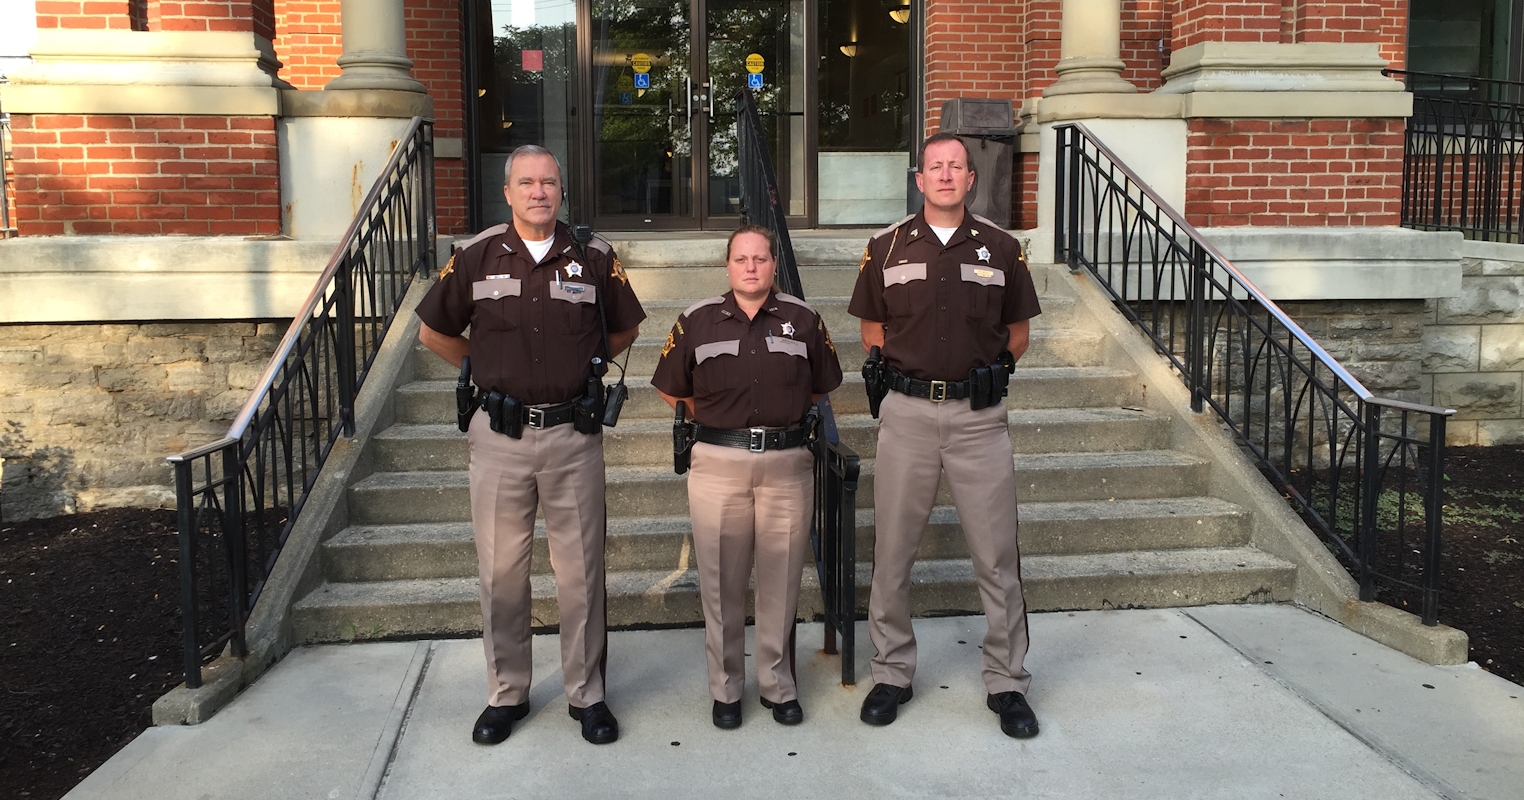 New Campbell County Sheriff's Uniforms